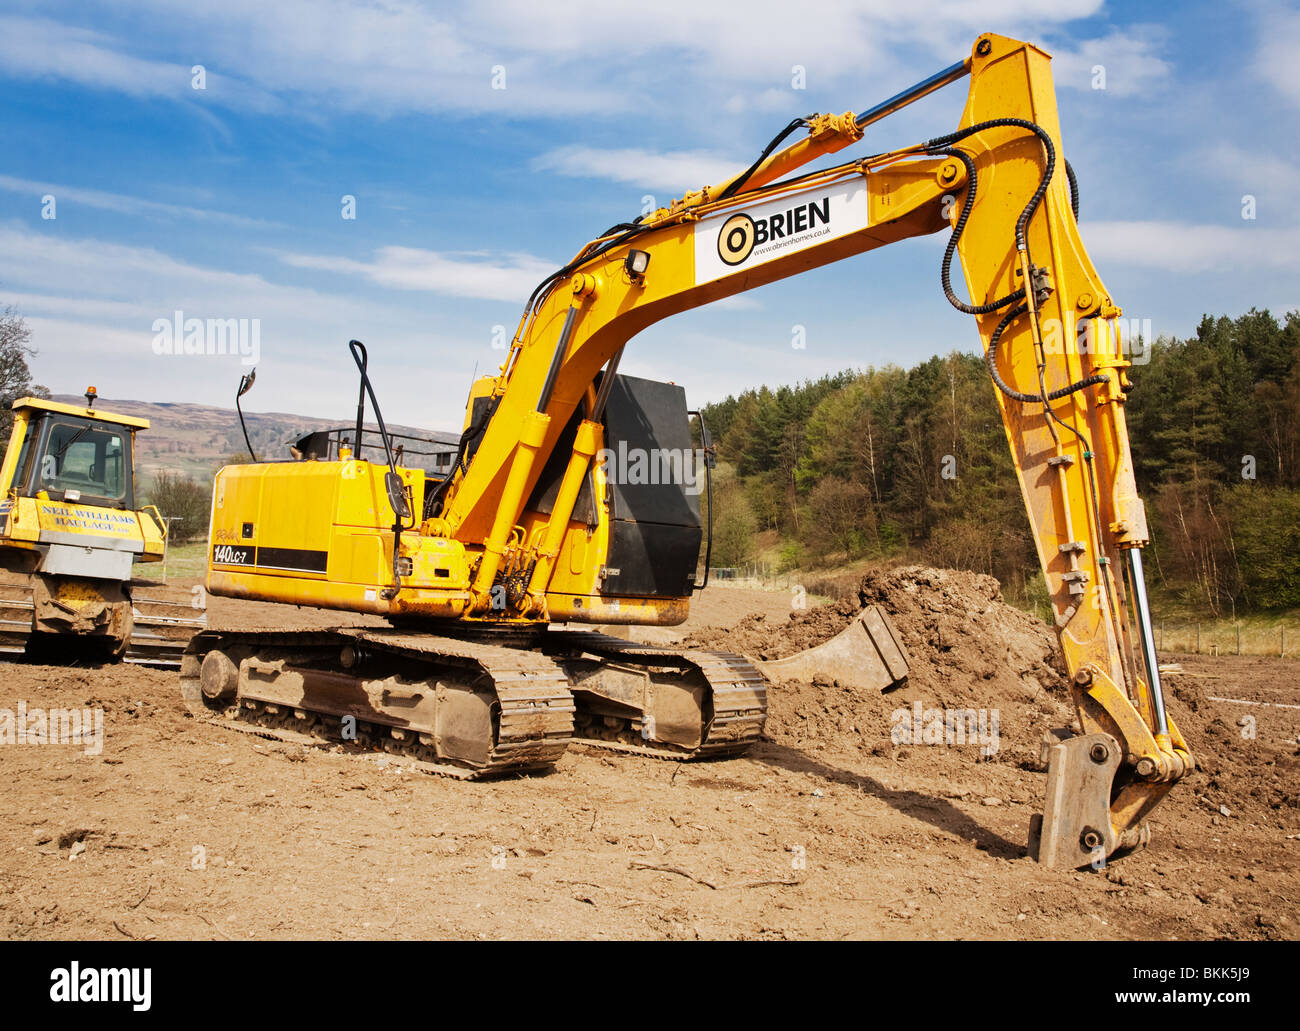 Hyundai 140LC-7 Robex Tracked Excavator with shutters over its windows on a construction site. Stock Photo